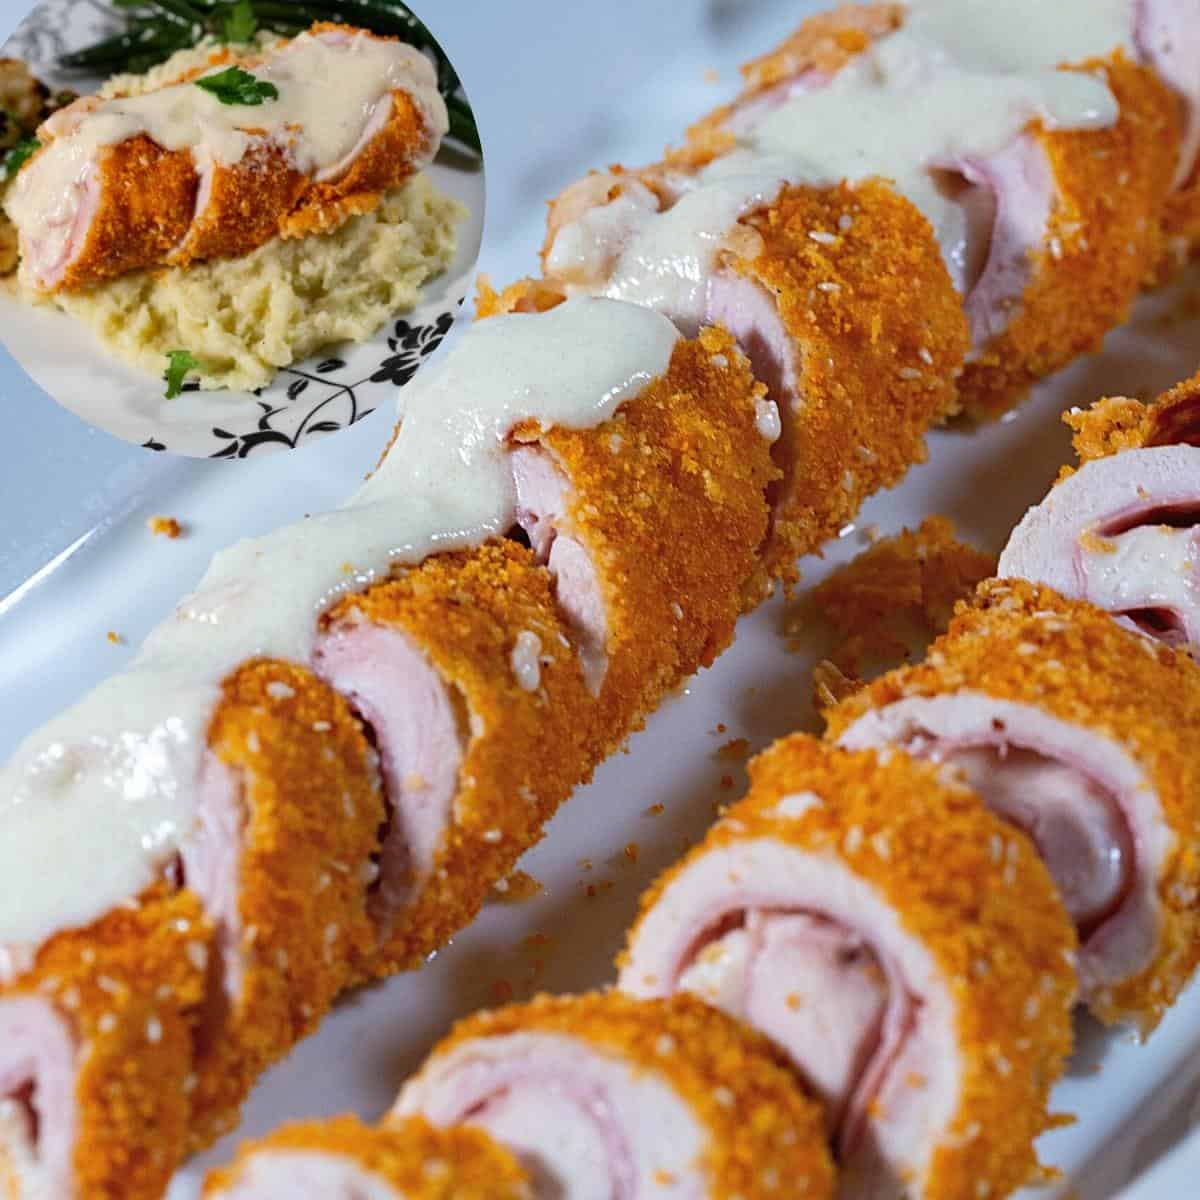 A chicken cordon bleu roulade topped with cheese sauce.